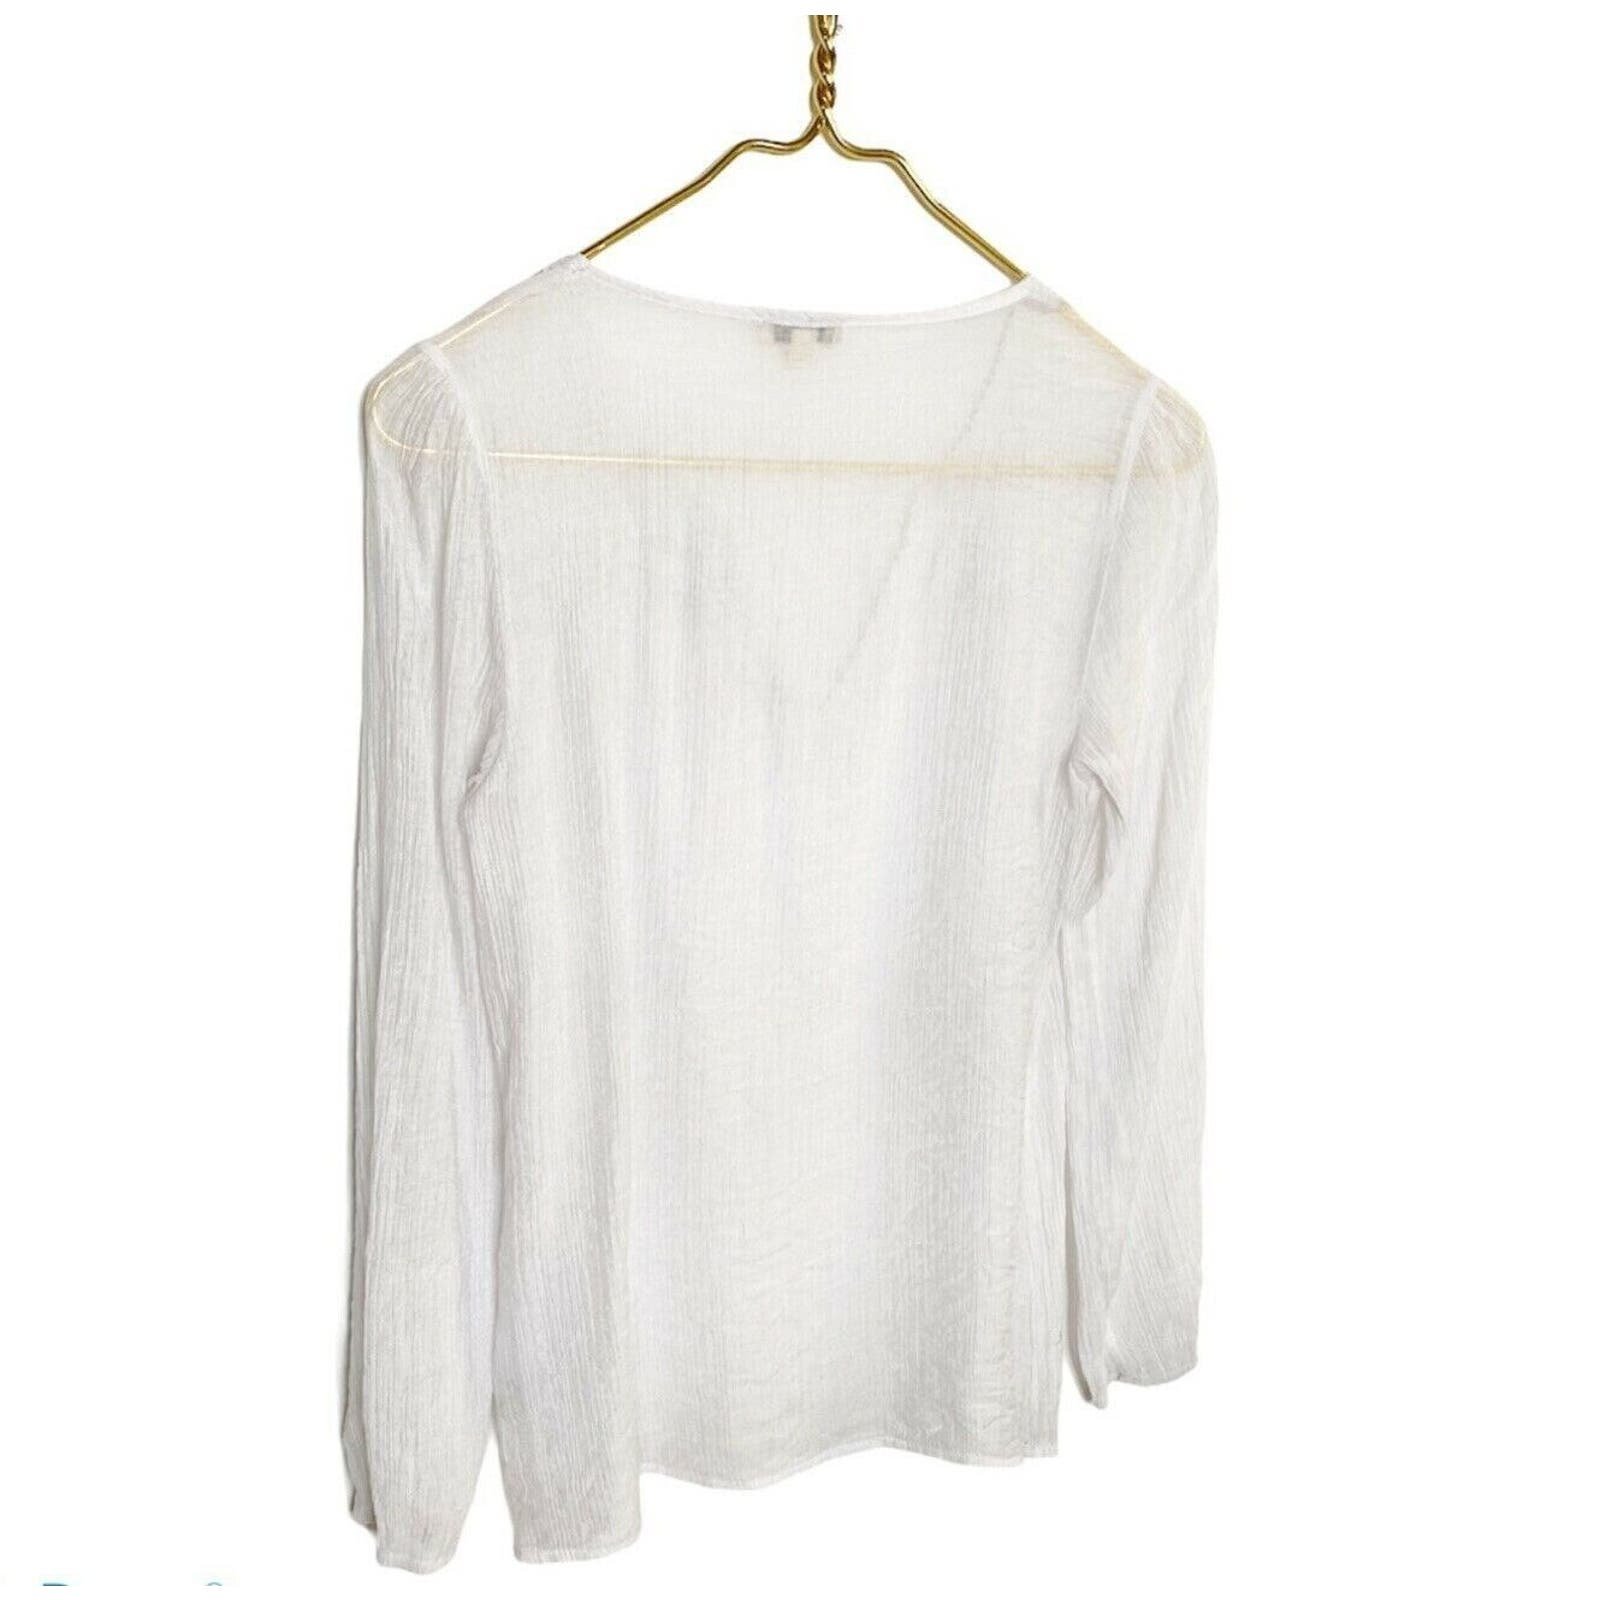 Stylish Lily White V Neck Top Sheer Long Sleeve Of White Embroidered Trim Sz Xs jMQymUXQ5 Discount